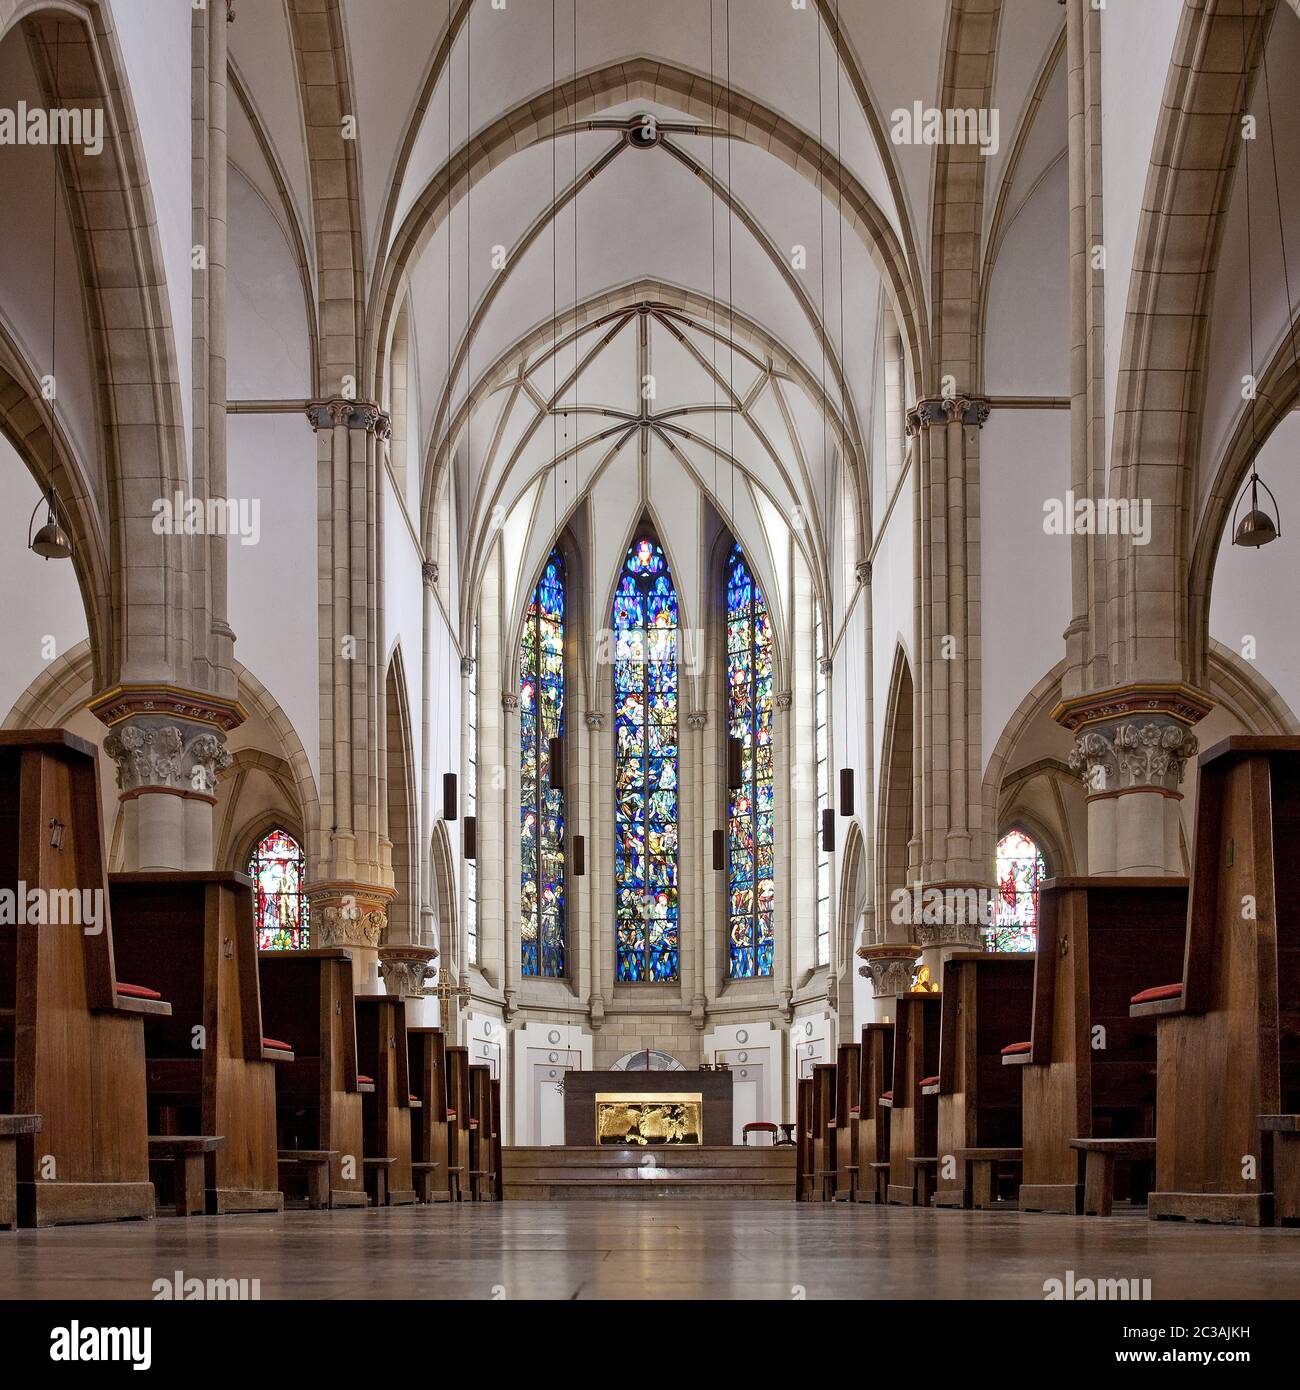 inside view of St. Augustinus church, Gelsenkirchen, Ruhr area, Germany, Europe Stock Photo